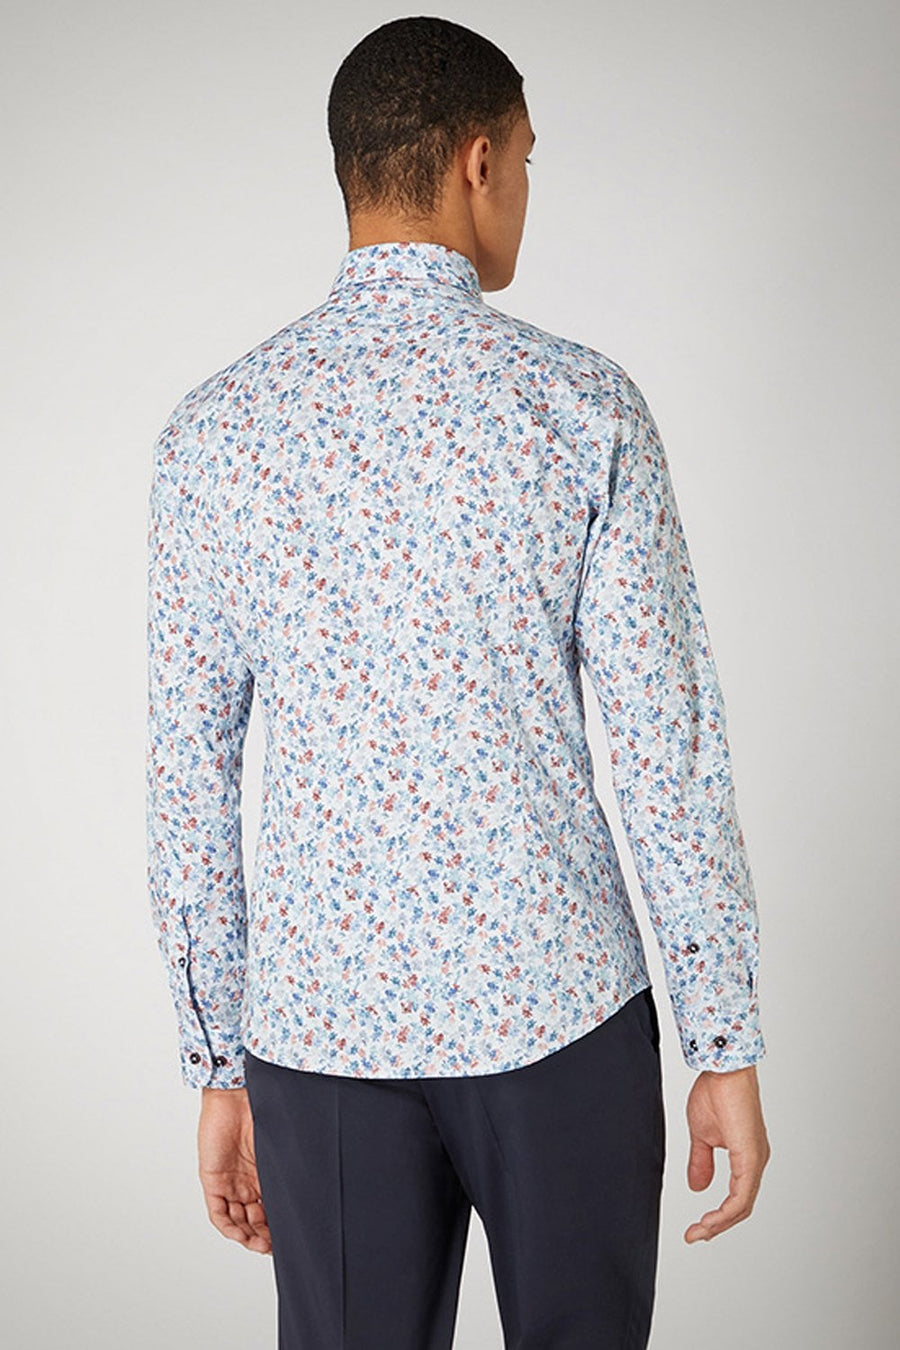 Buy the Remus Uomo Flower Design L/S Shirt in Blue/Red at Intro. Spend £50 for free UK delivery. Official stockists. We ship worldwide.